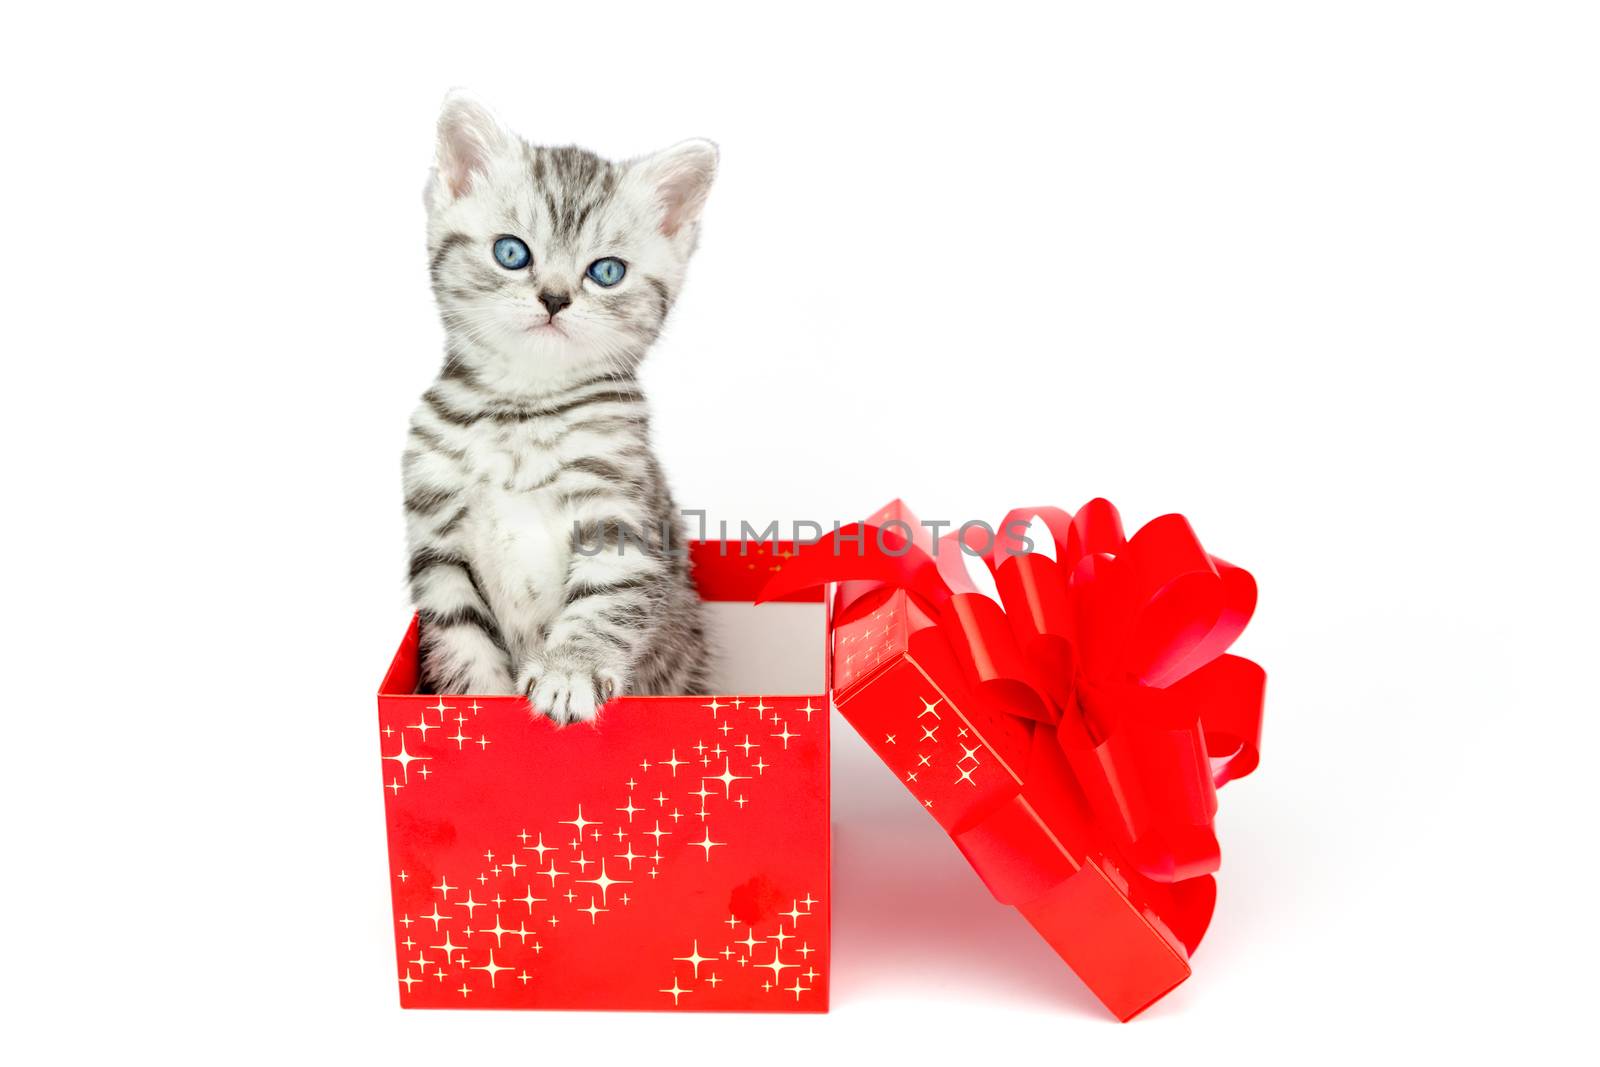 Young silver tabby cat standing in red box with stars by BenSchonewille